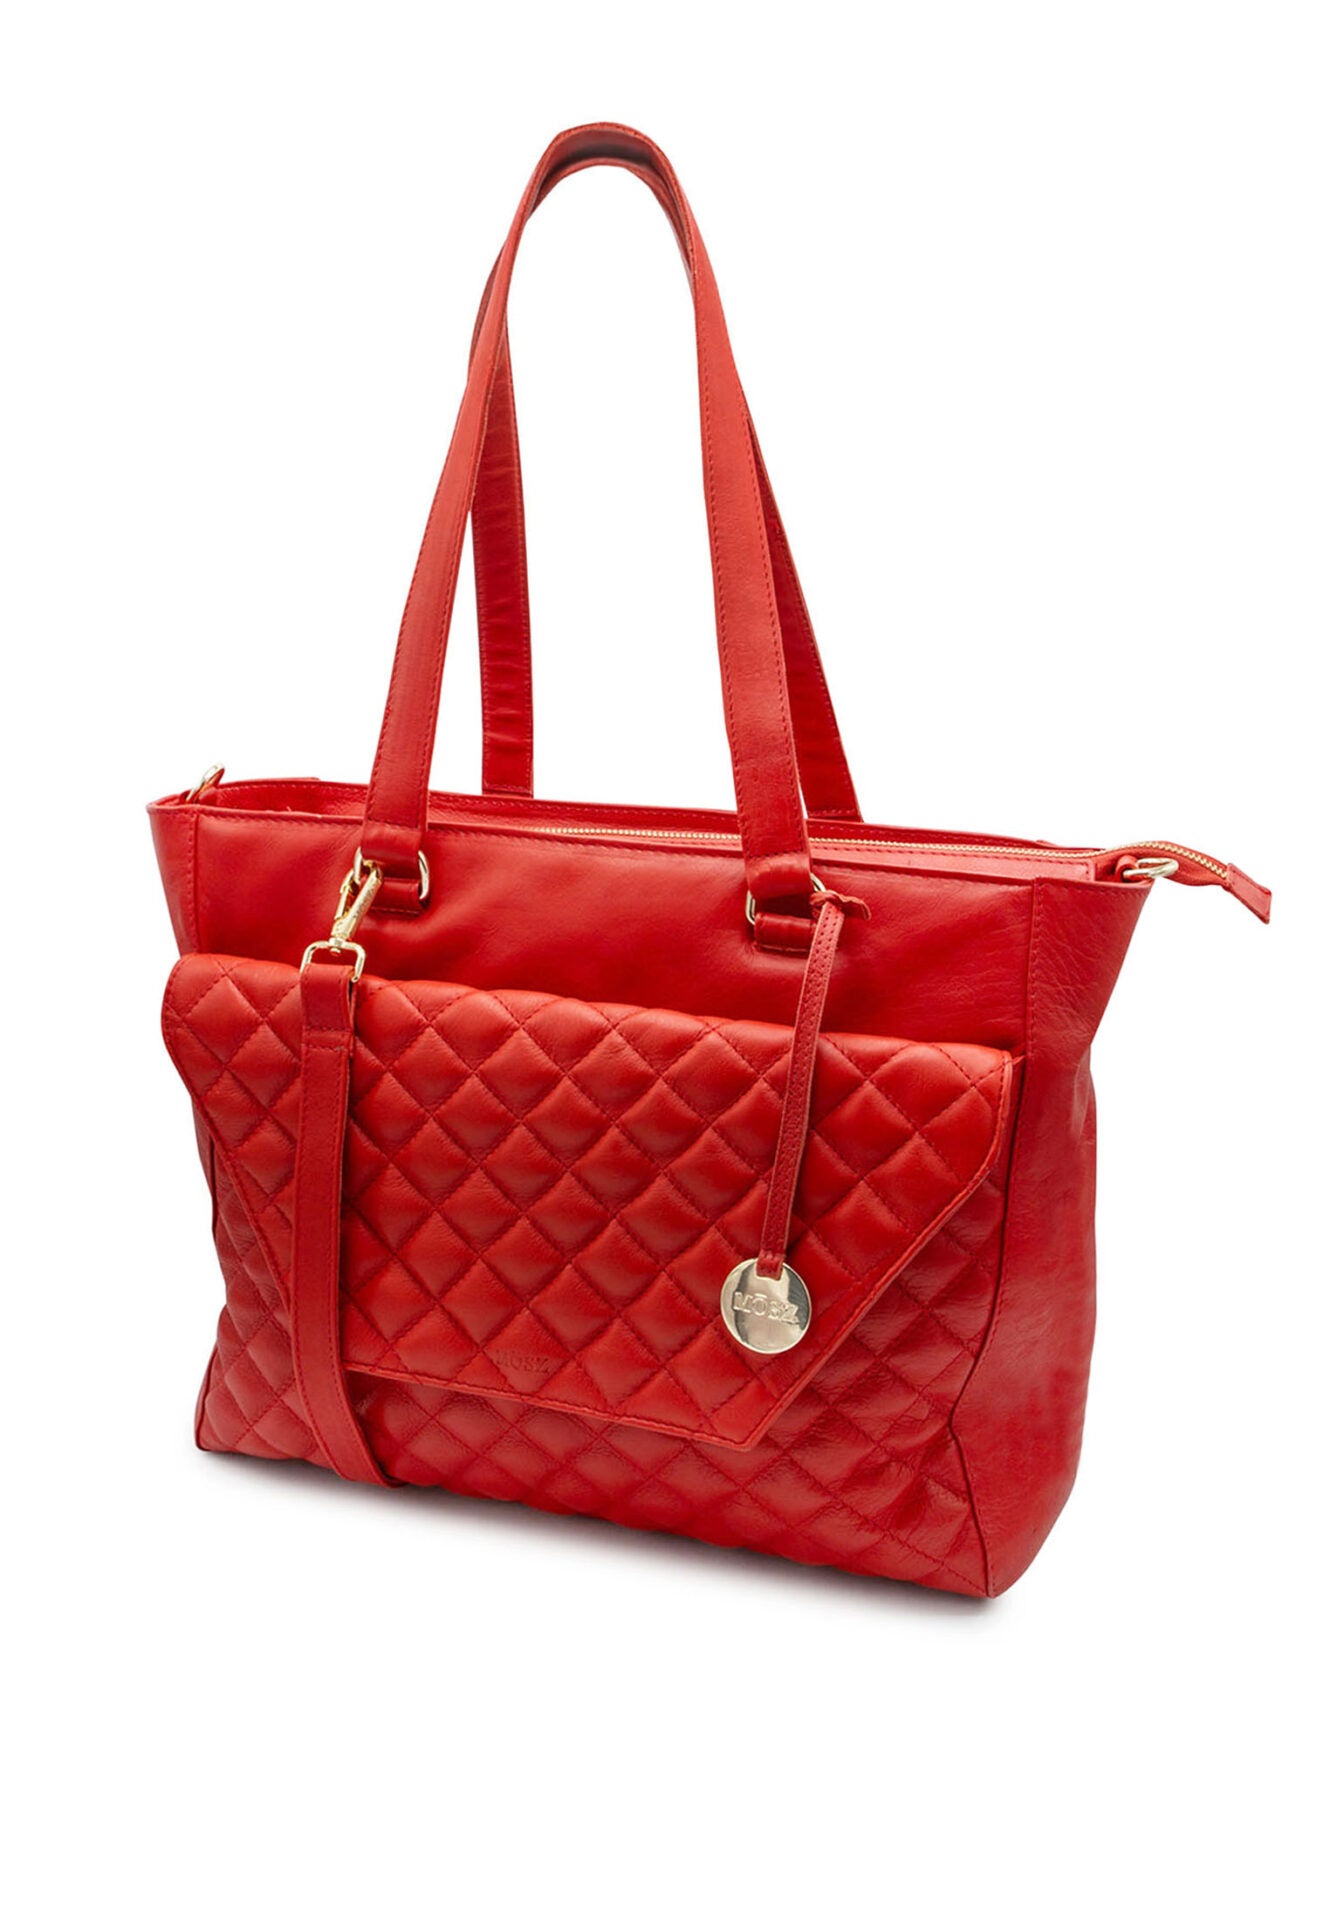 Leather laptop bag ladies 15.6 inch - red quilted - MŌSZ Denise